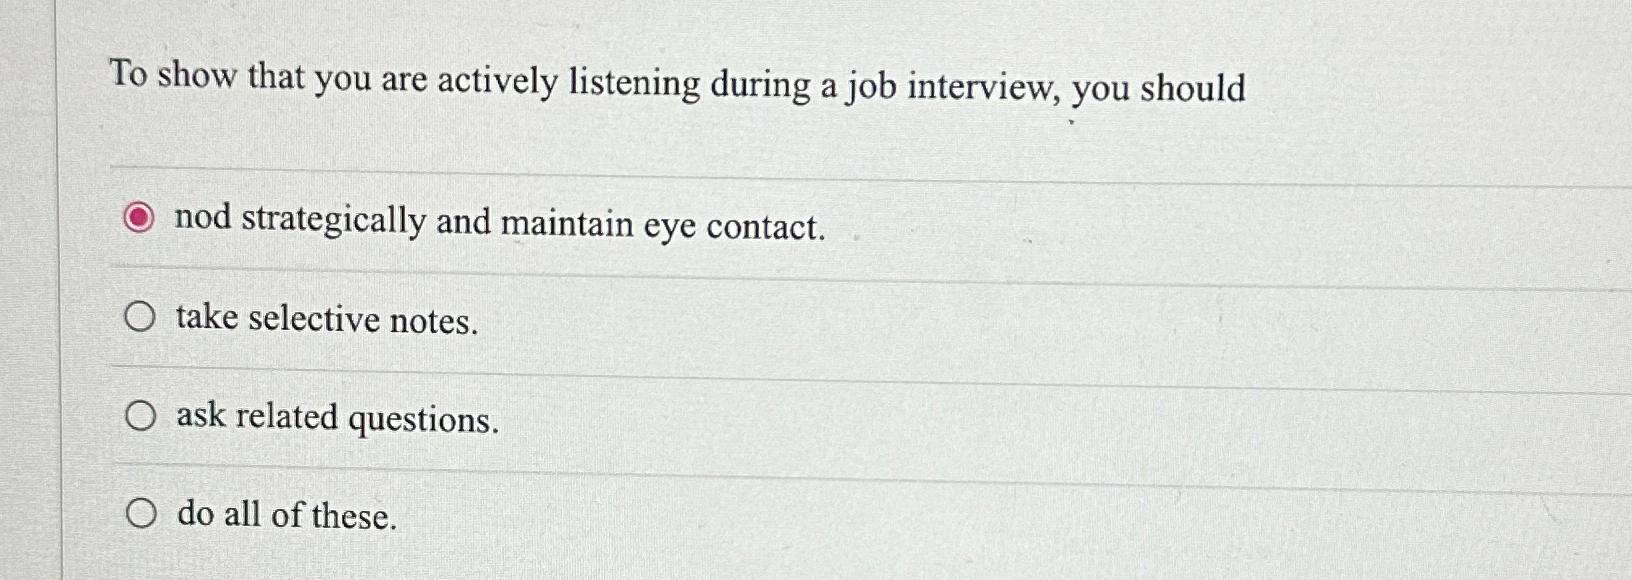 To show that you are actively listening during a job interview, you should nod strategically and maintain eye